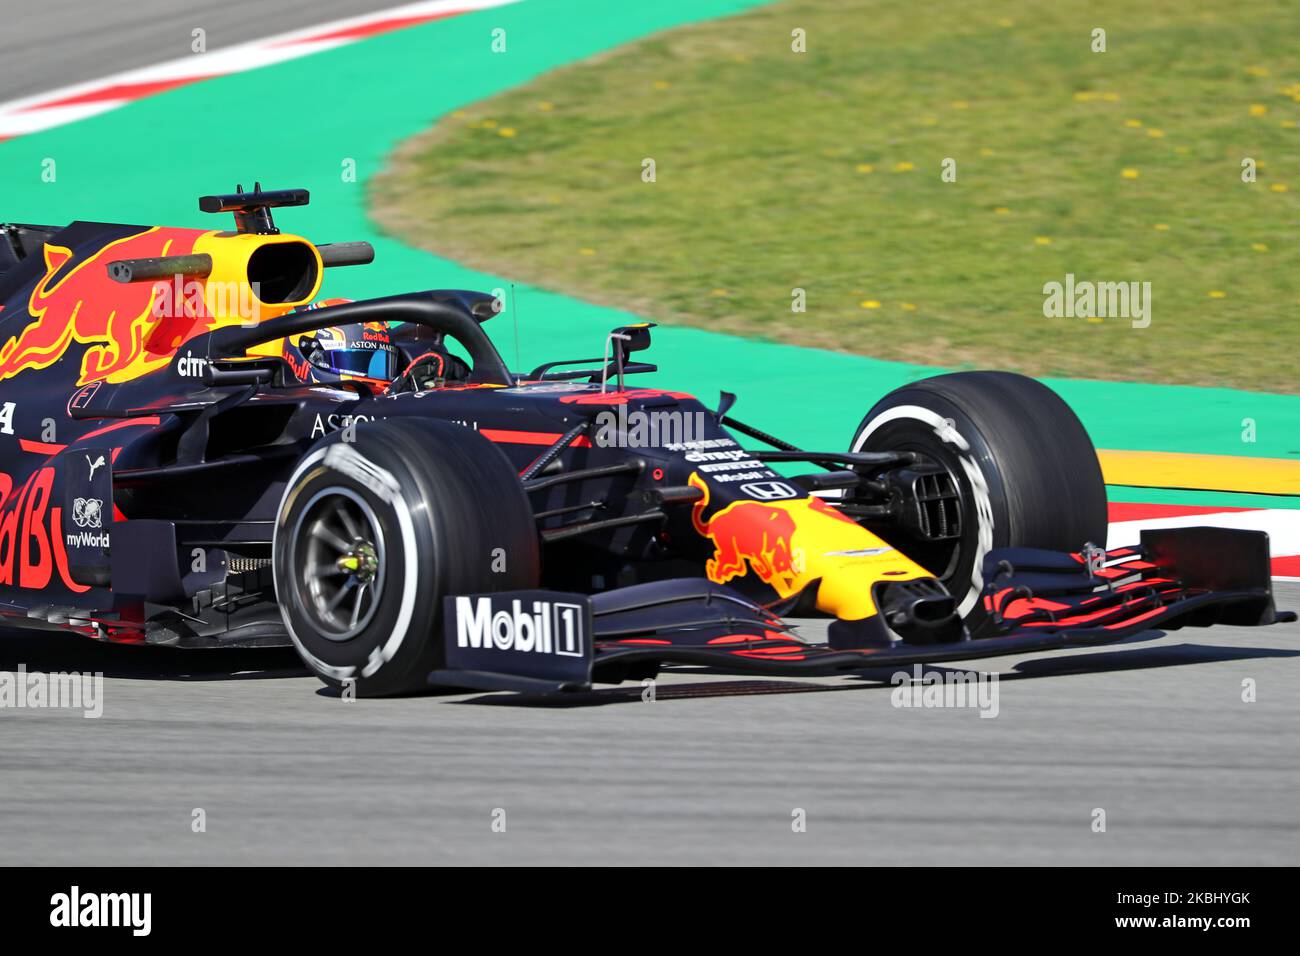 Alexander Albon and the Aston Martin Red Bull RB 16 during the day 4 of the formula 1 testing, on 26 February 2020, in Barcelona, Spain. -- (Photo by Urbanandsport/NurPhoto) Stock Photo